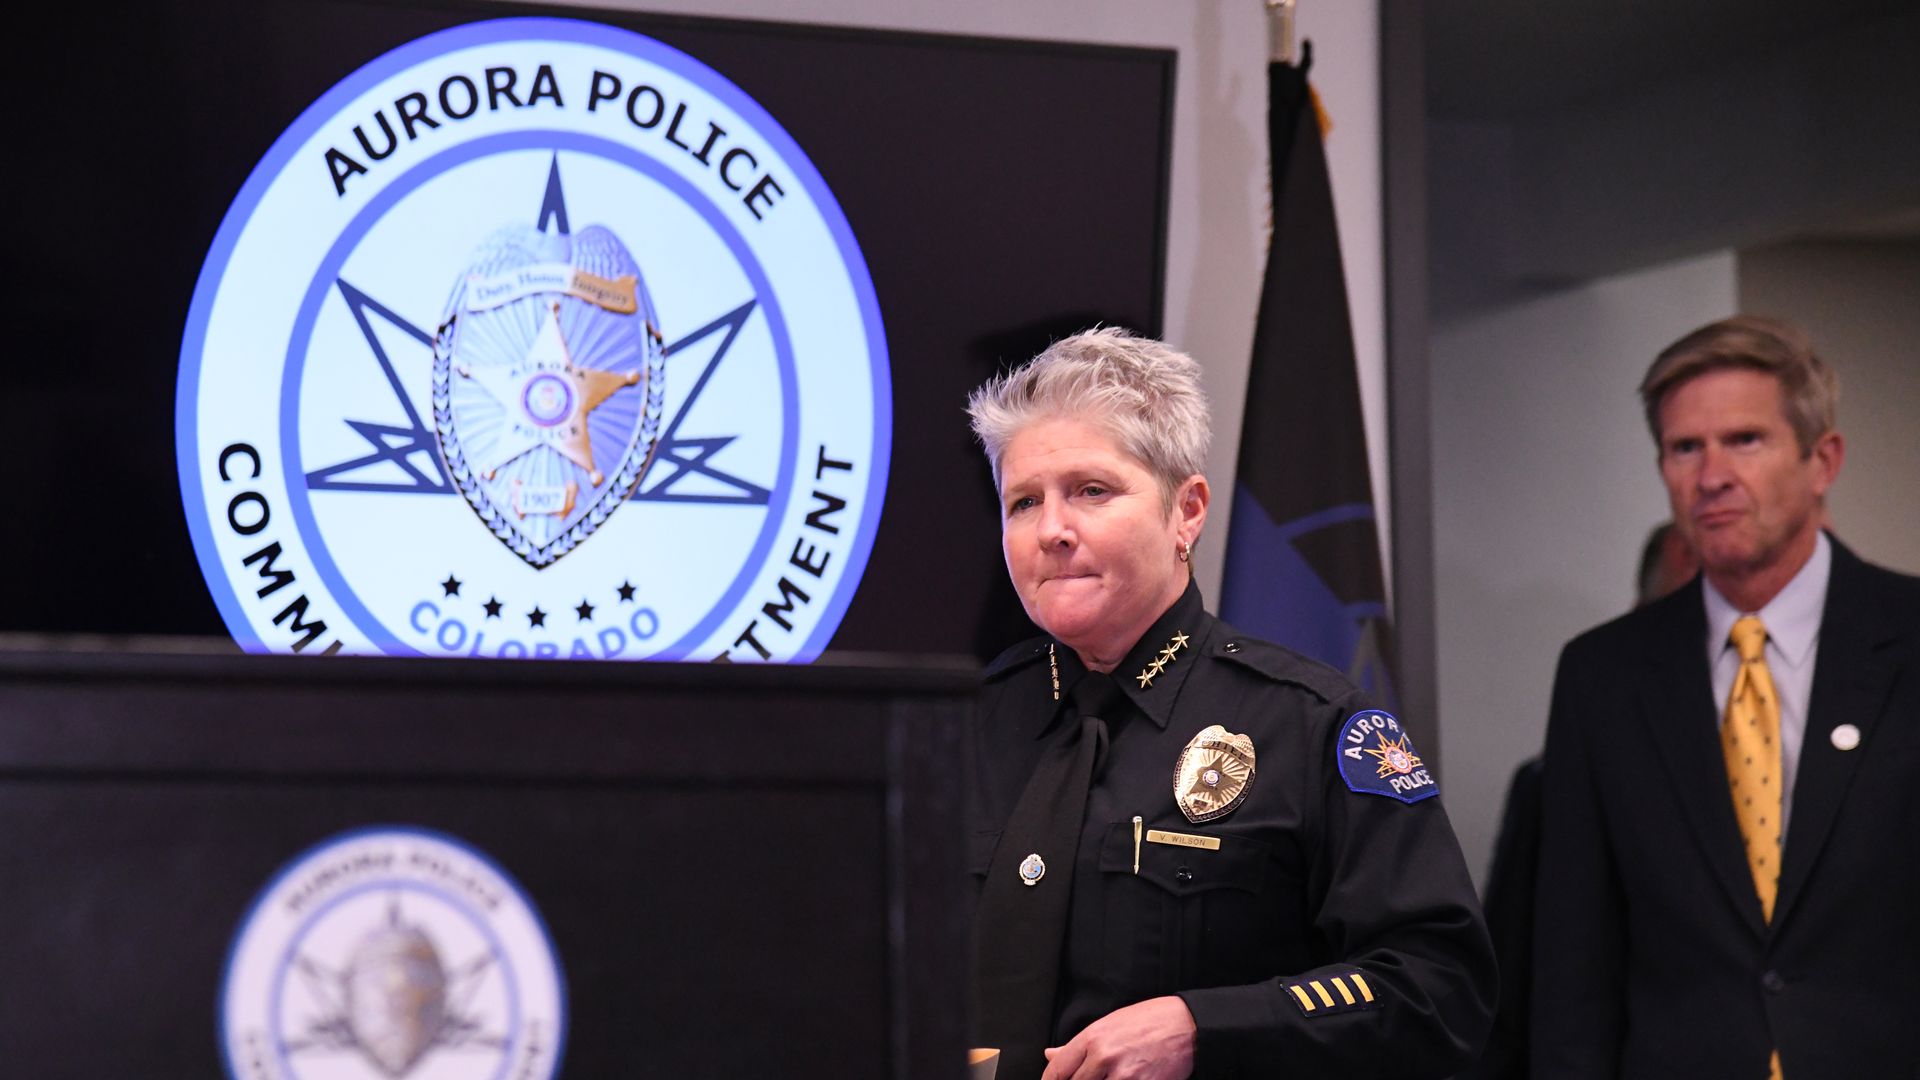 Aurora Police Chief Vanessa Wilson, left, and City Manager Jim Twombly are in the press conference at Aurora Police Department Headquarters in Aurora, Colorado on Tuesday, July 27